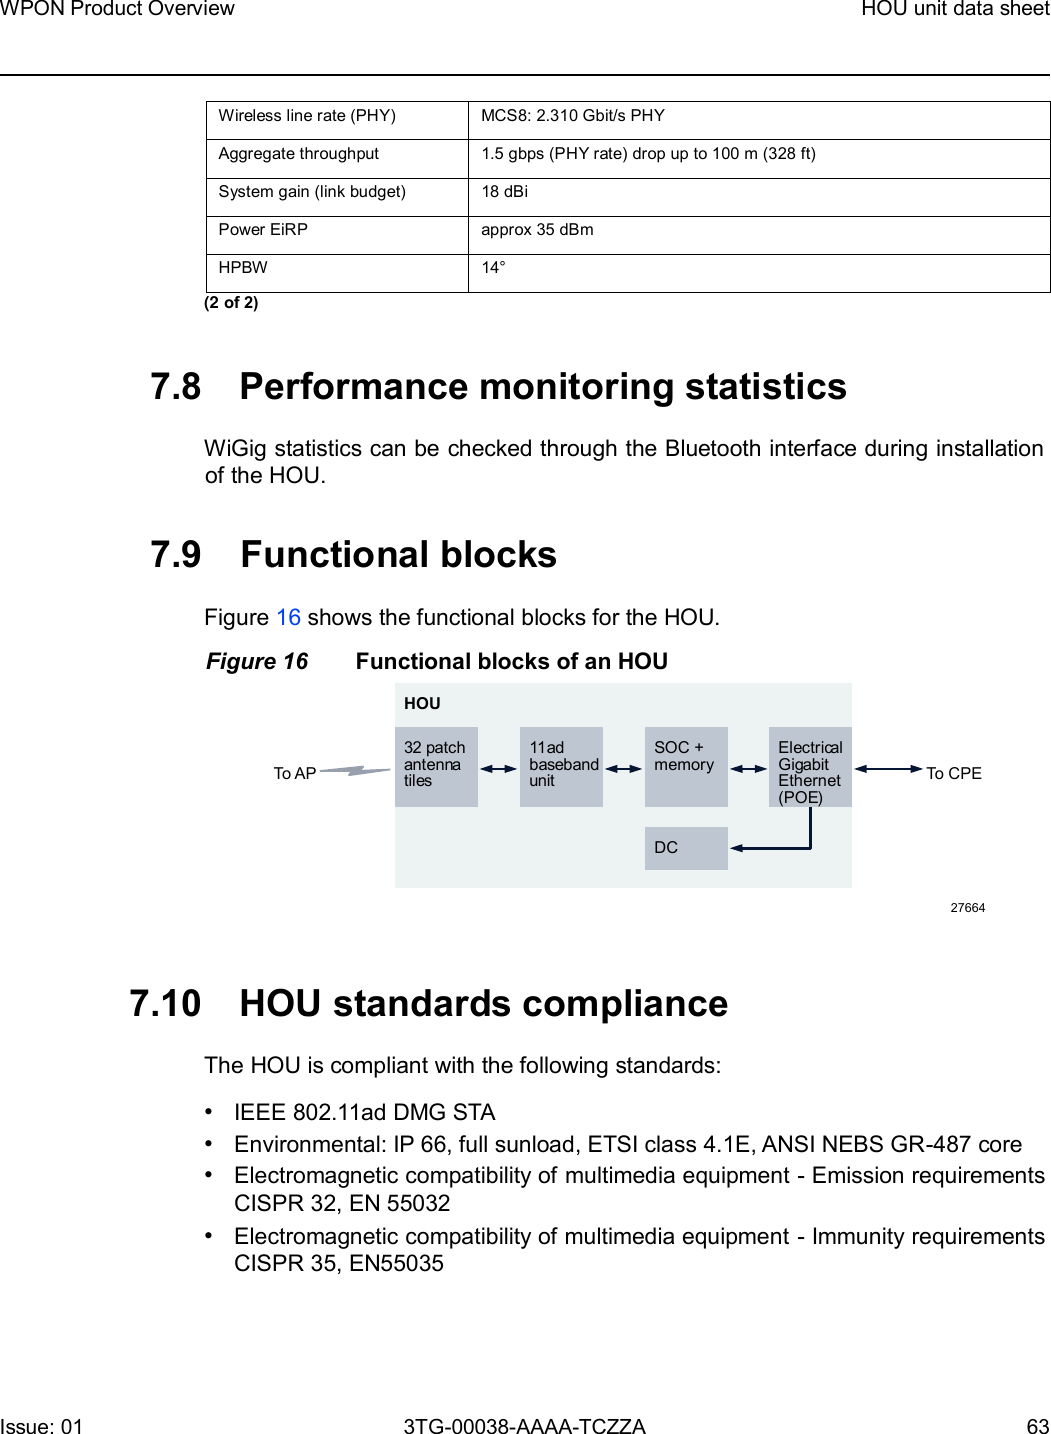 Page 63 of Nokia Bell 7577WPONAPAC WPON User Manual WPON Product Overview